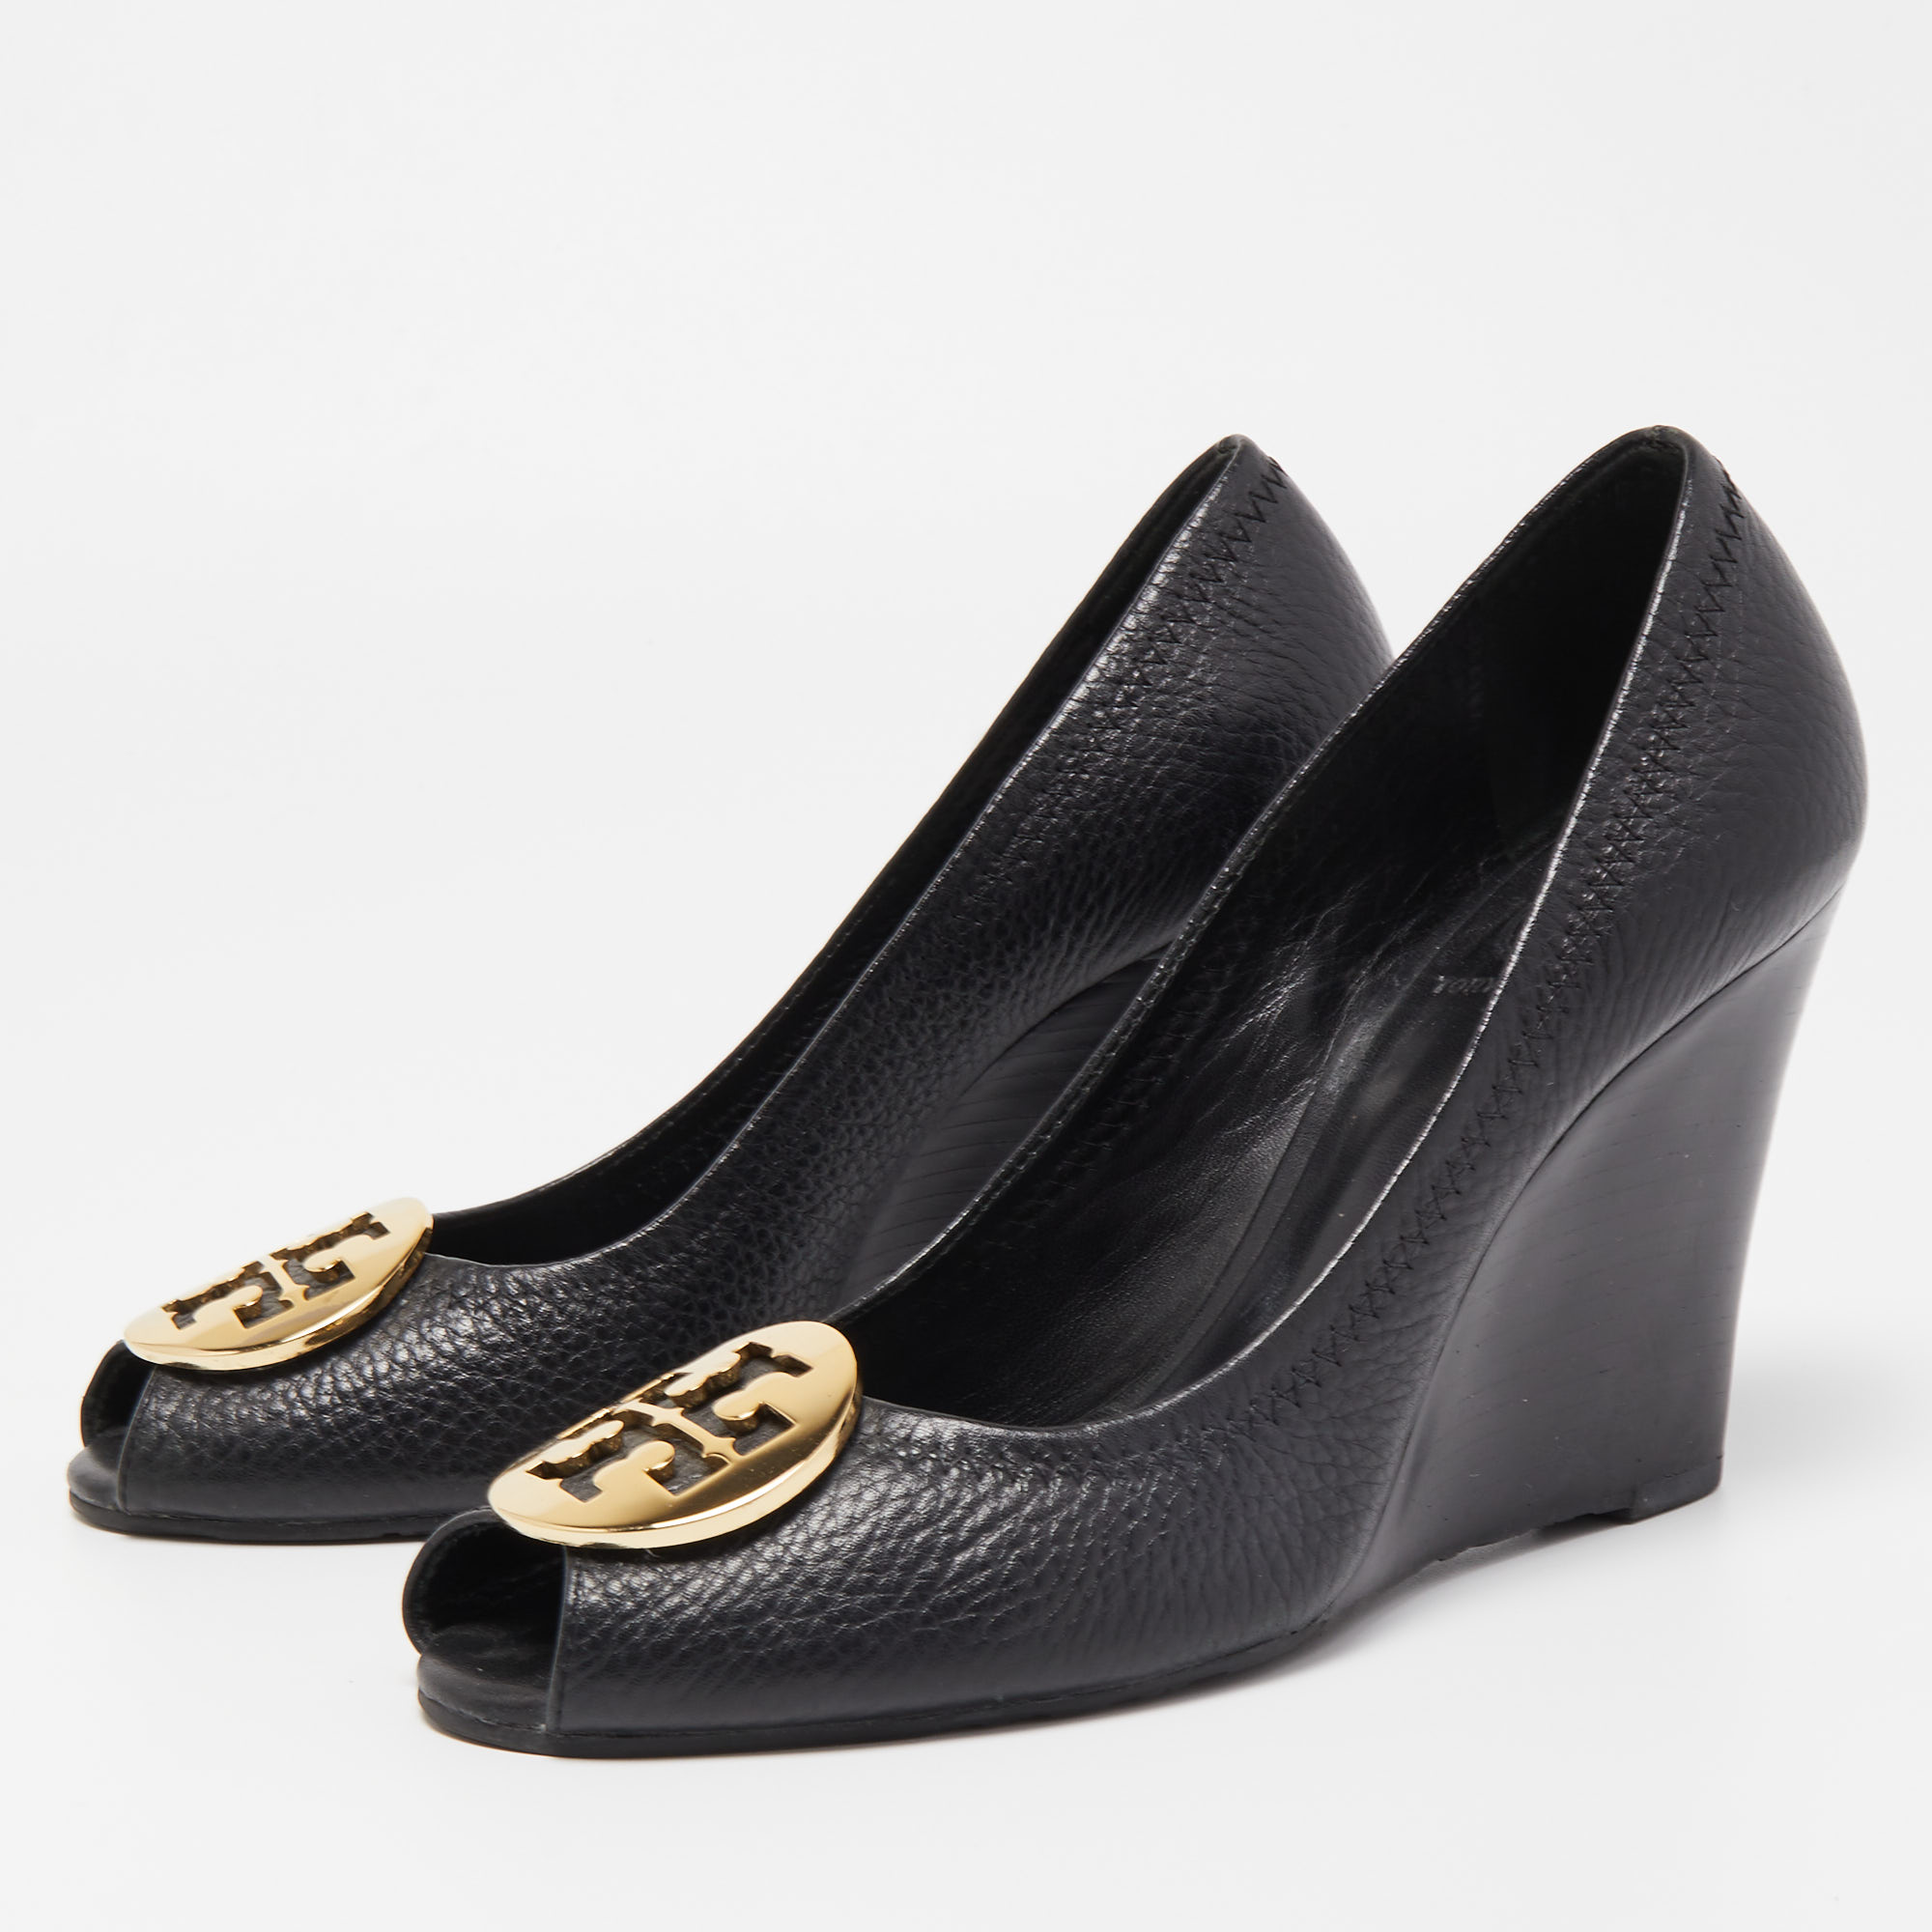 

Tory Burch Black Leather Sophie Peep Toe Wedge Pumps Size